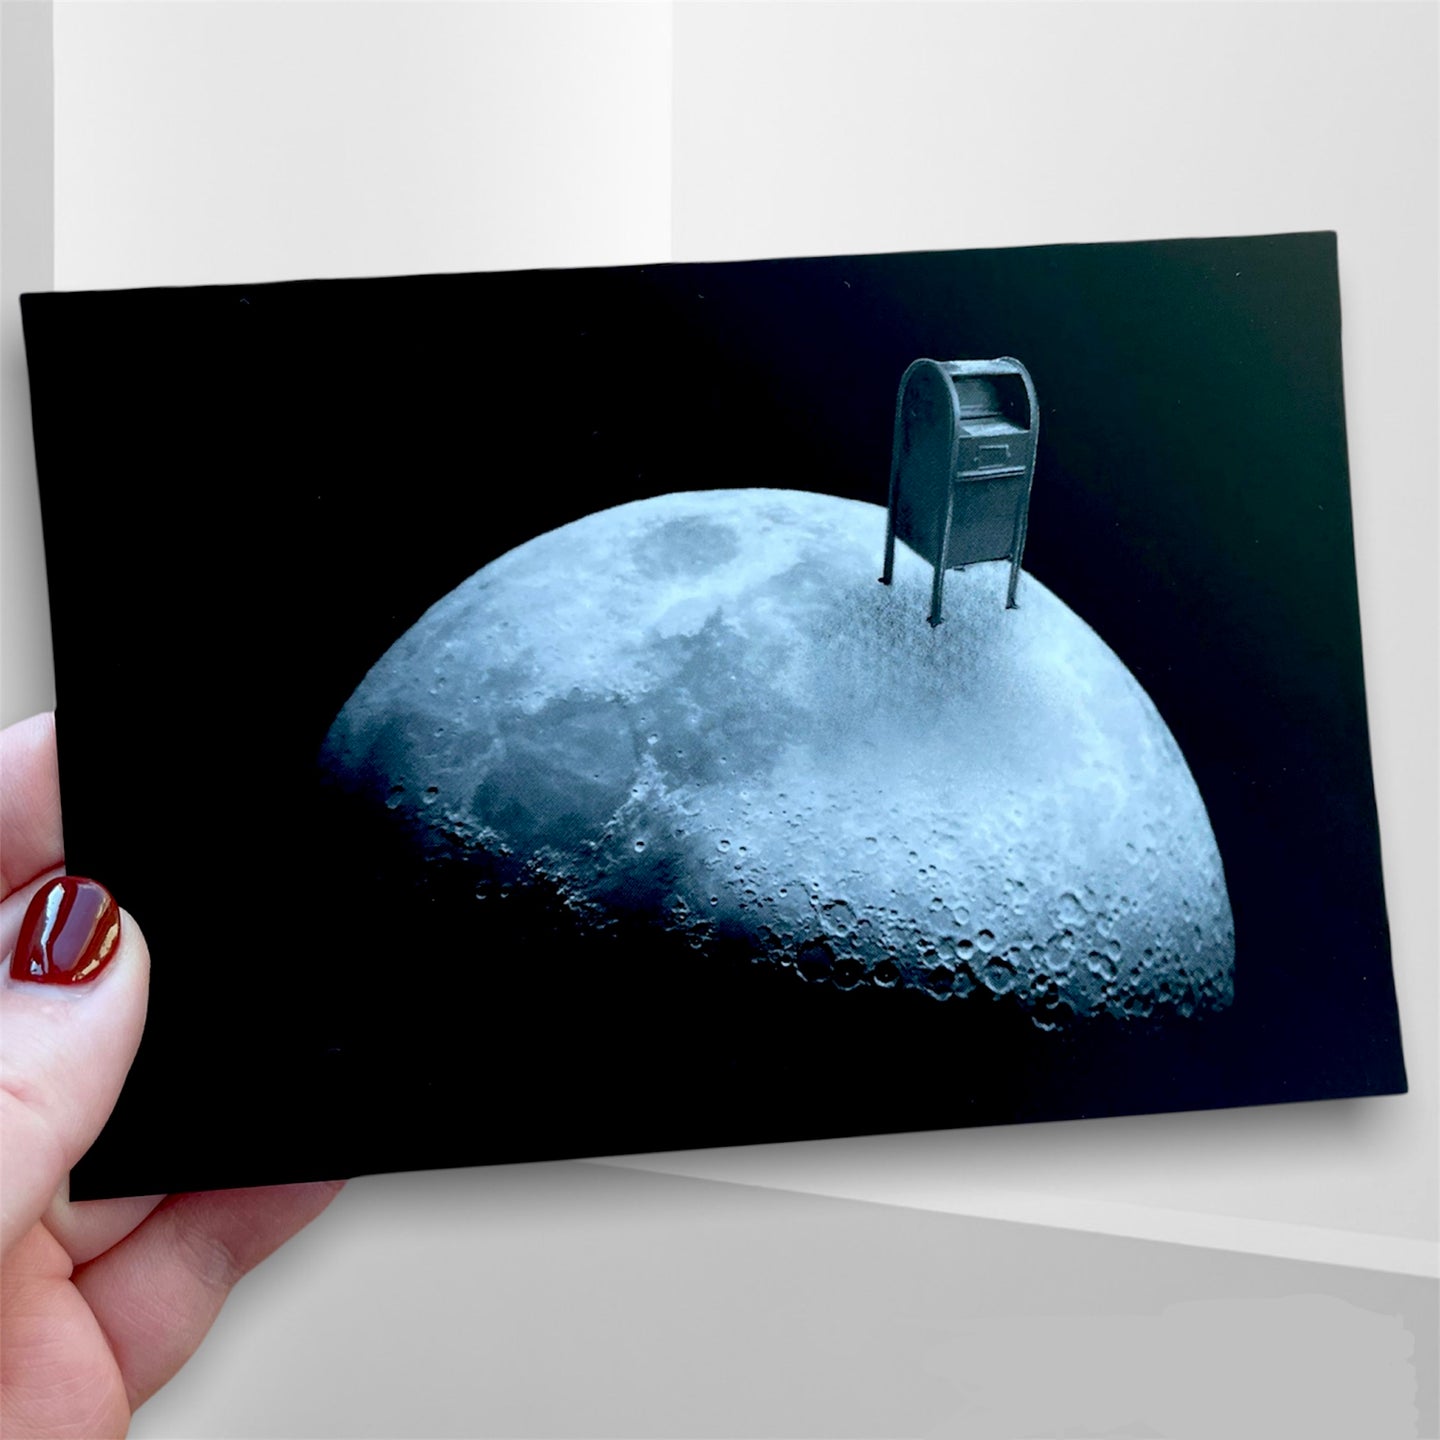 The Postbox on the Moon Postcard